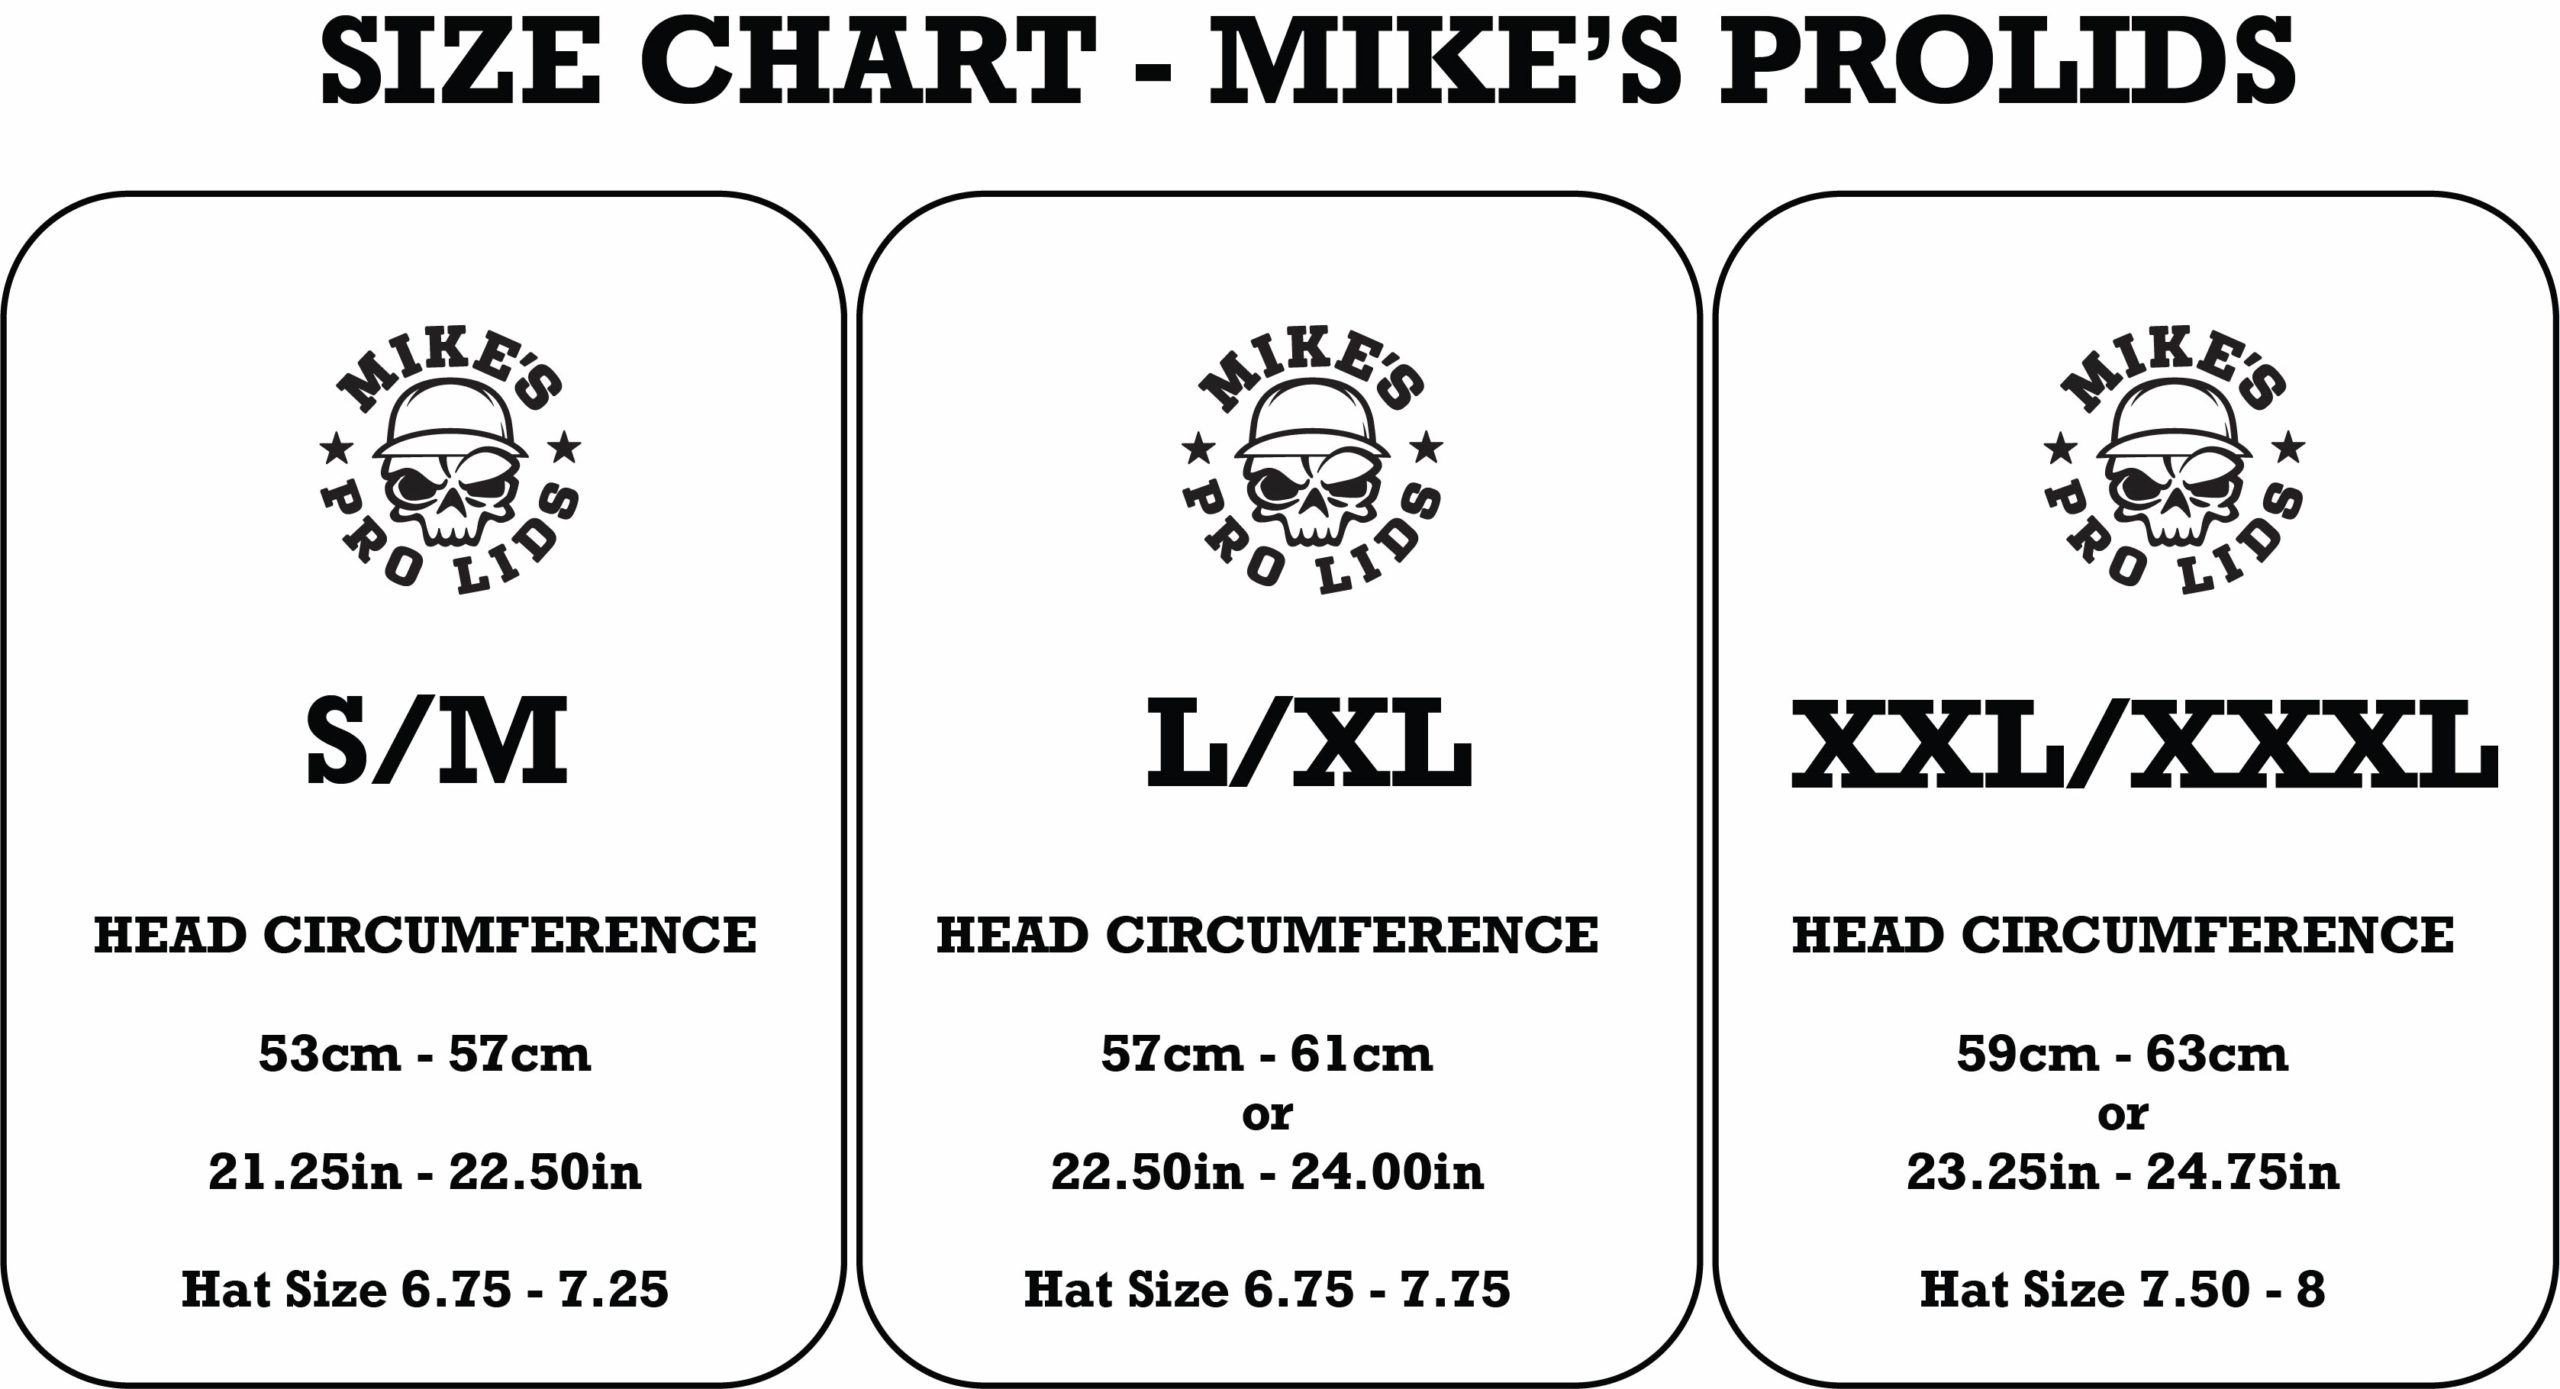 Use the Mikes Pro Lids size chart to learn which liner size works best so you get a comfortable fitting Lid.